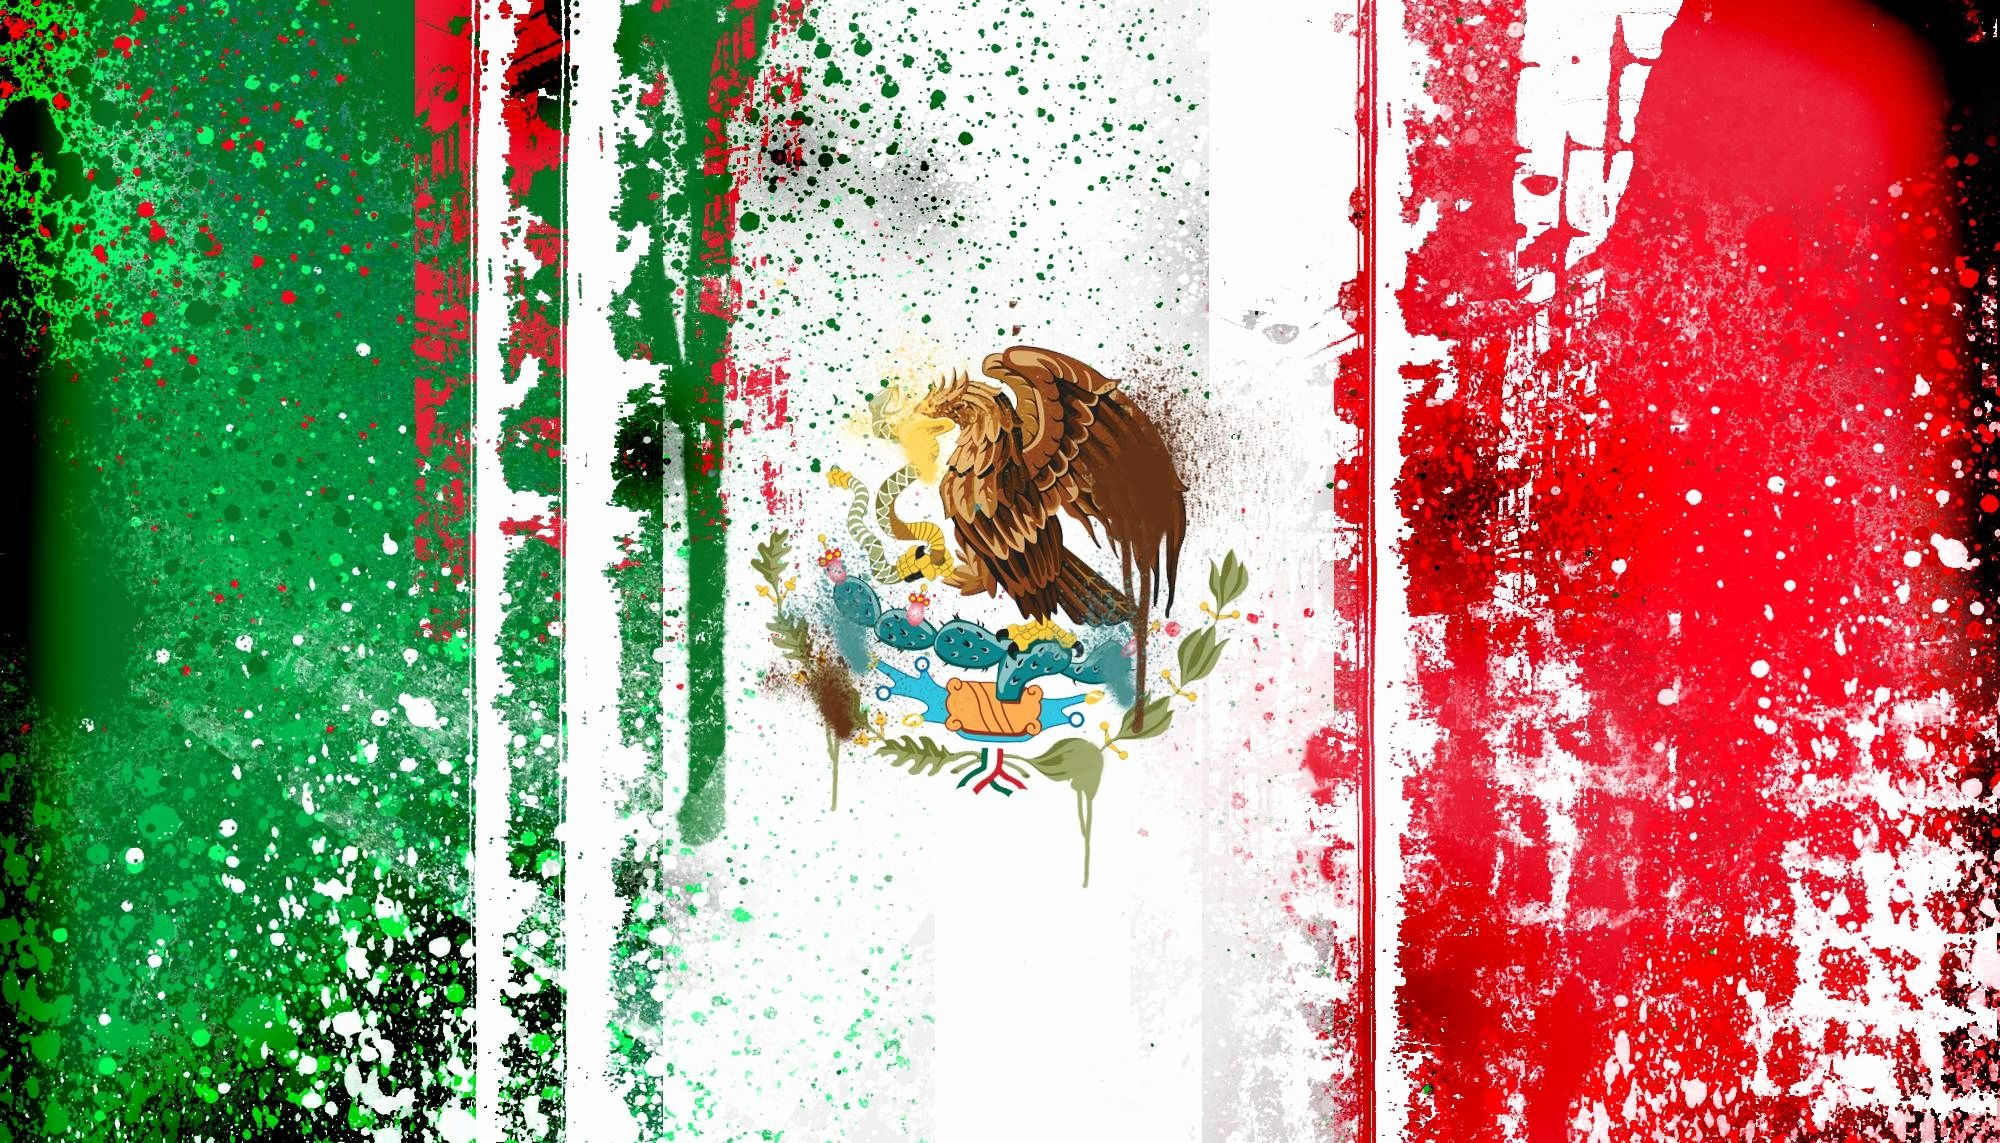 Mexican Wallpaper Lovely Cool Mexican Background 2019 of The Hudson